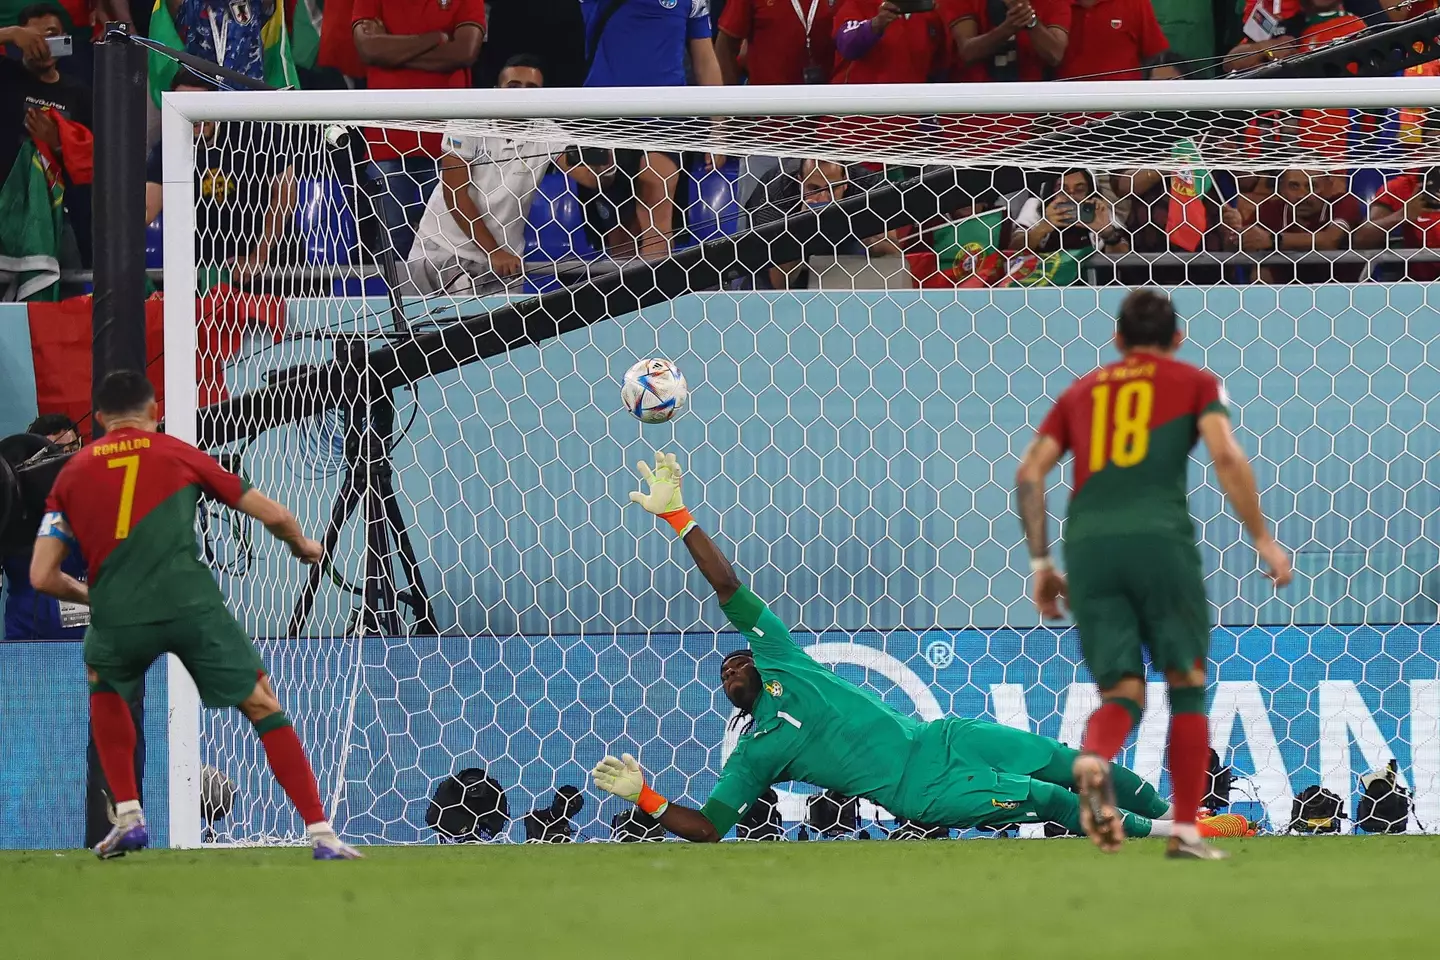 Cristiano Ronaldo expertly beat Ghana’s Lawrence Ati-Zigi from the spot-kick in Portugal’s 3-2 win at the World Cup.